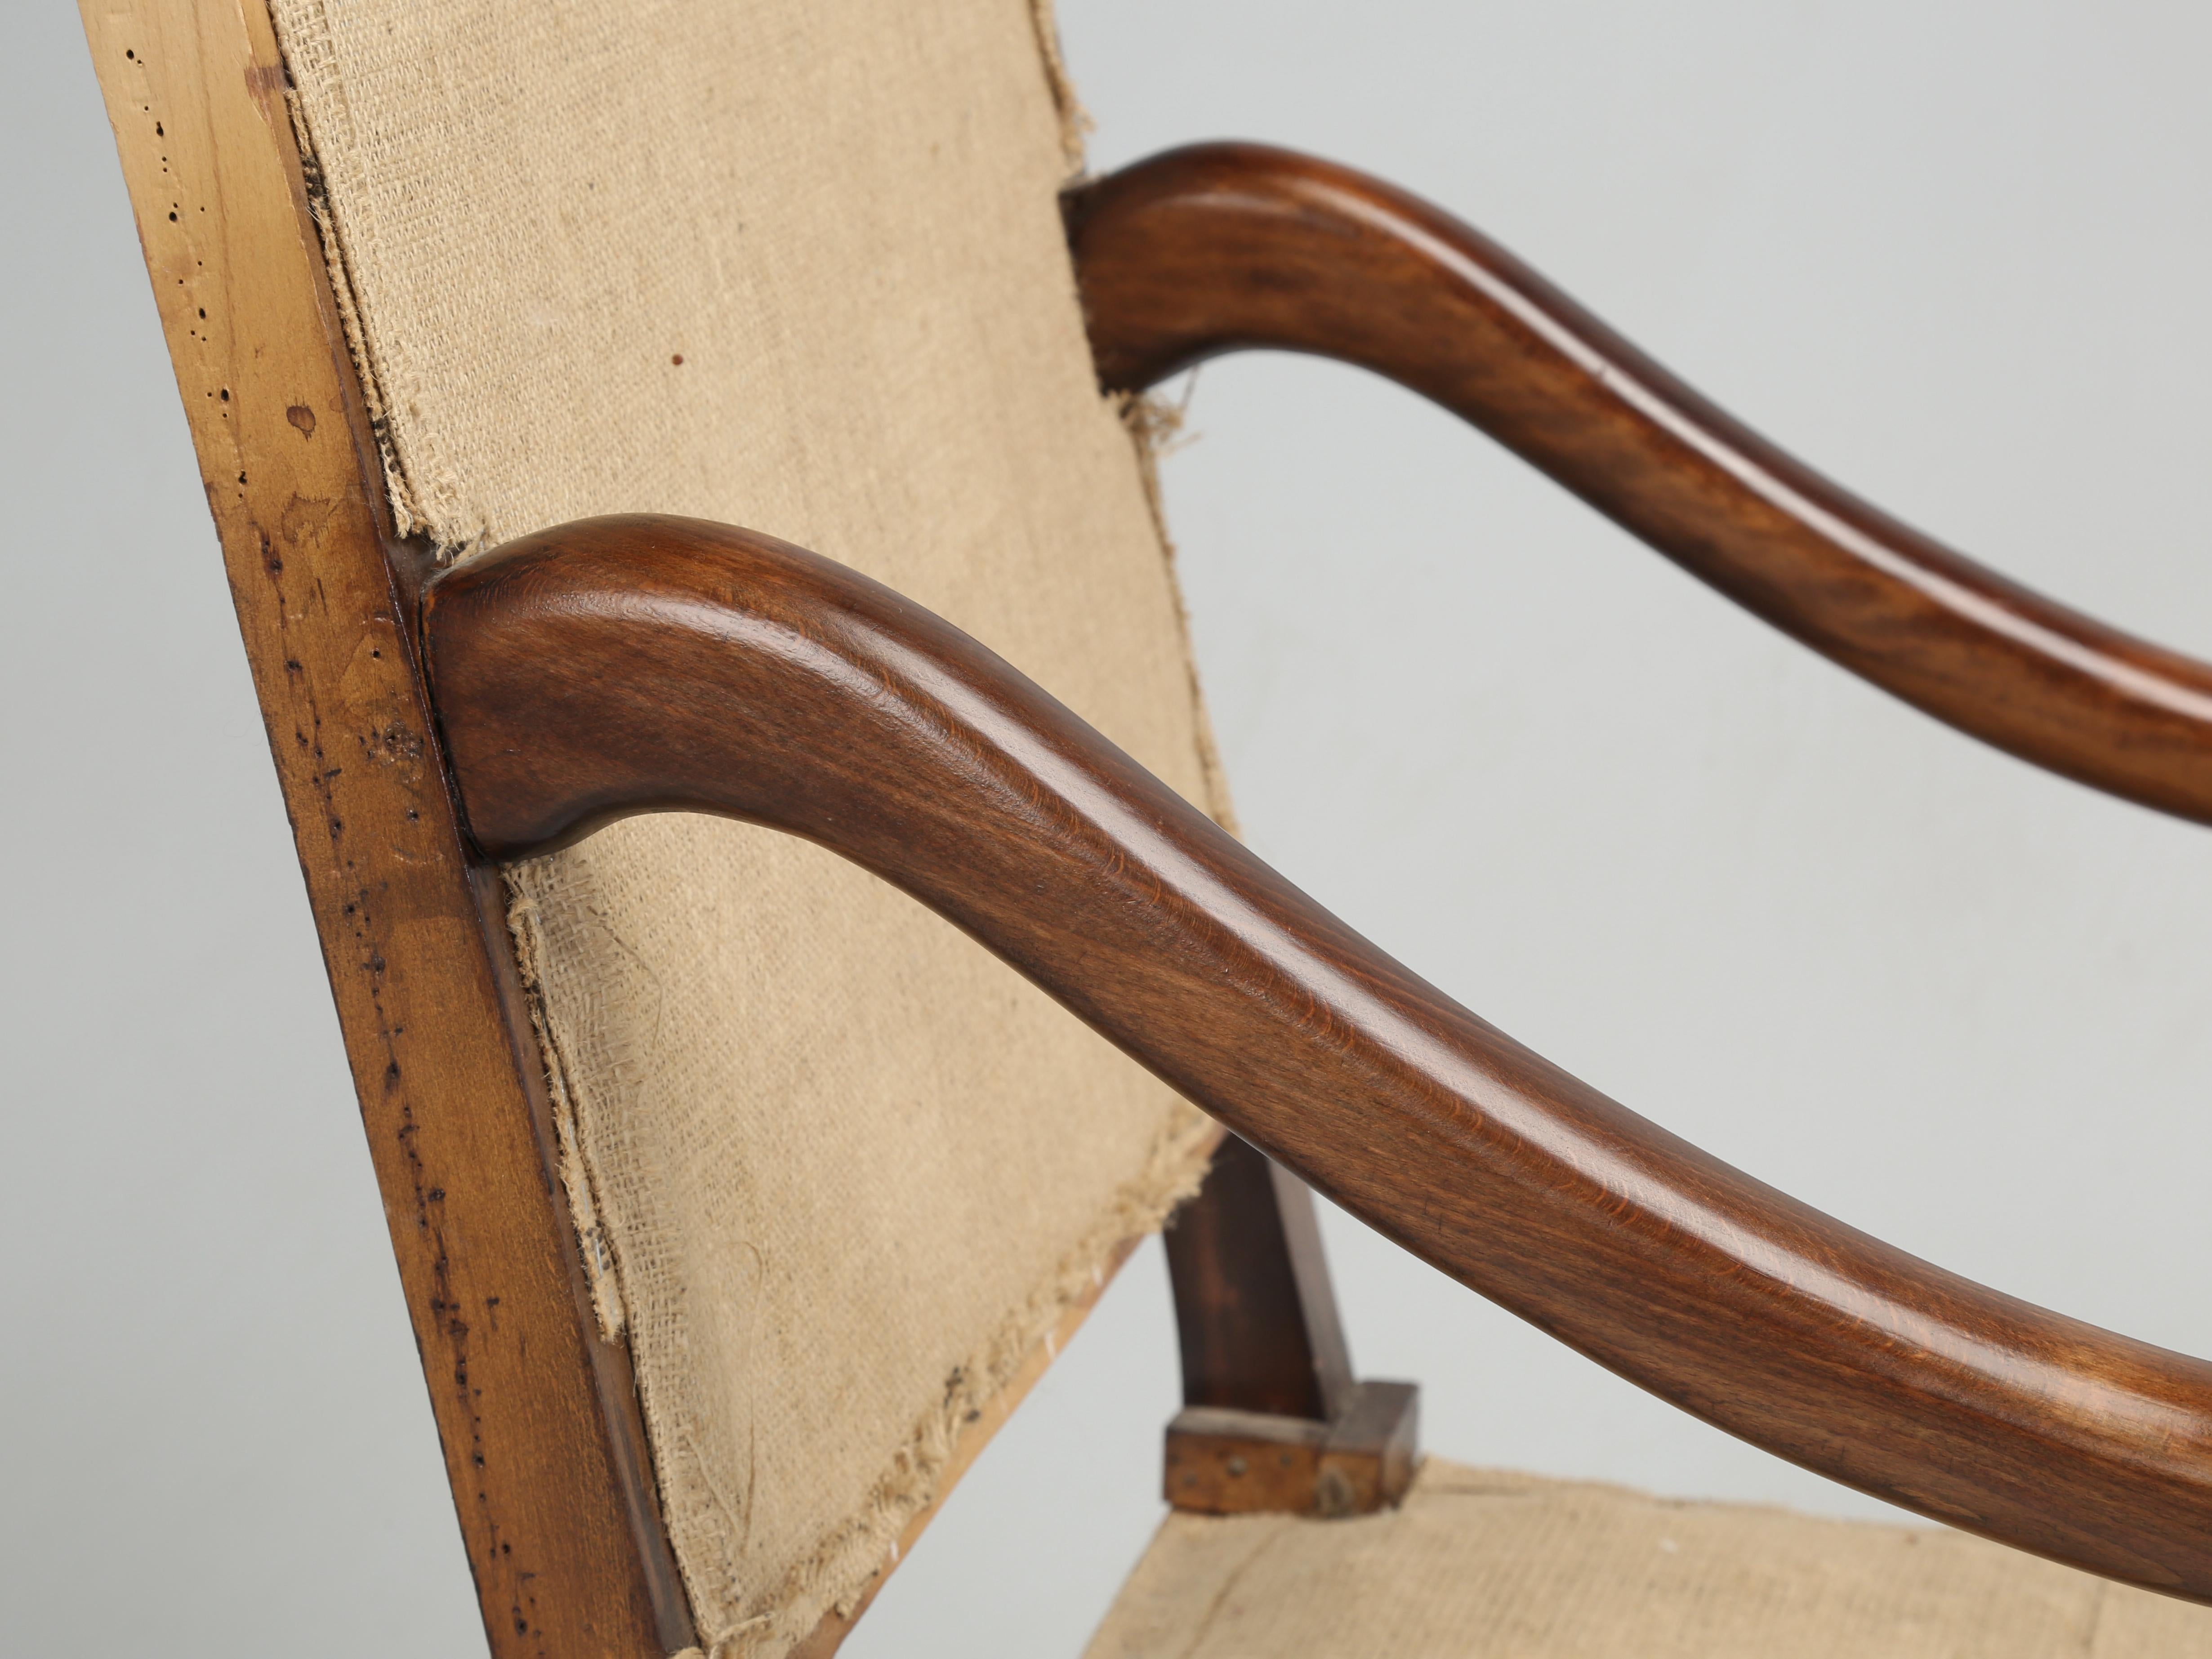 Pair of French Classic Os De Mouton Arm Chairs that are old enough to have been assembled with wood pegs. When we see the wooden peg construction it generally indicates that the chairs were made in the early 1900's or before. Our inhouse Old Plank